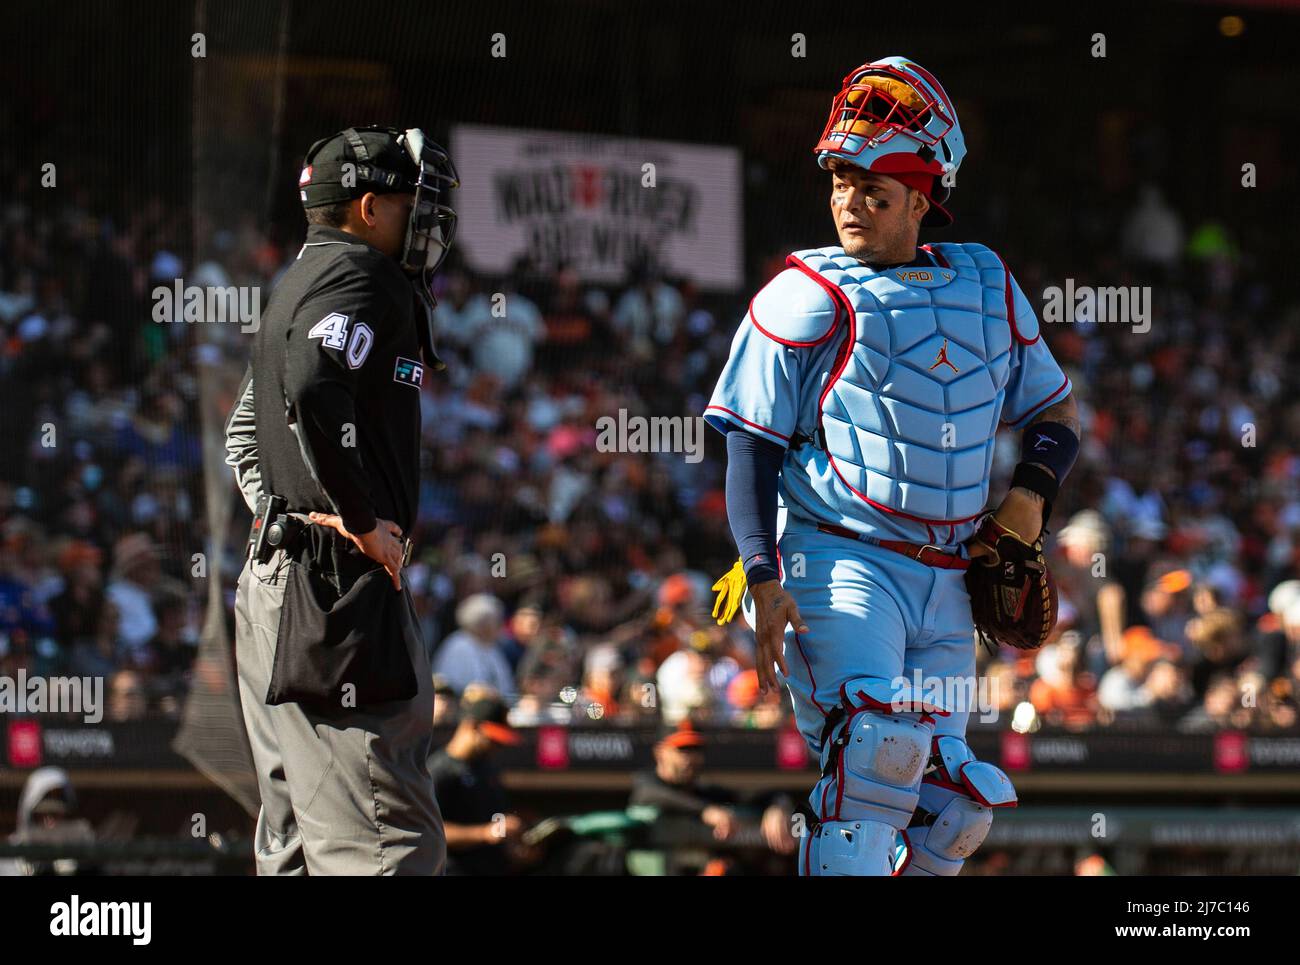 May 07 2022 San Francisco CA, U.S.A. St. Louis catcher Yadier Molina (4)  reacts after an infield out during MLB game between the St. Louis Cardinals  and the San Francisco Giants. The